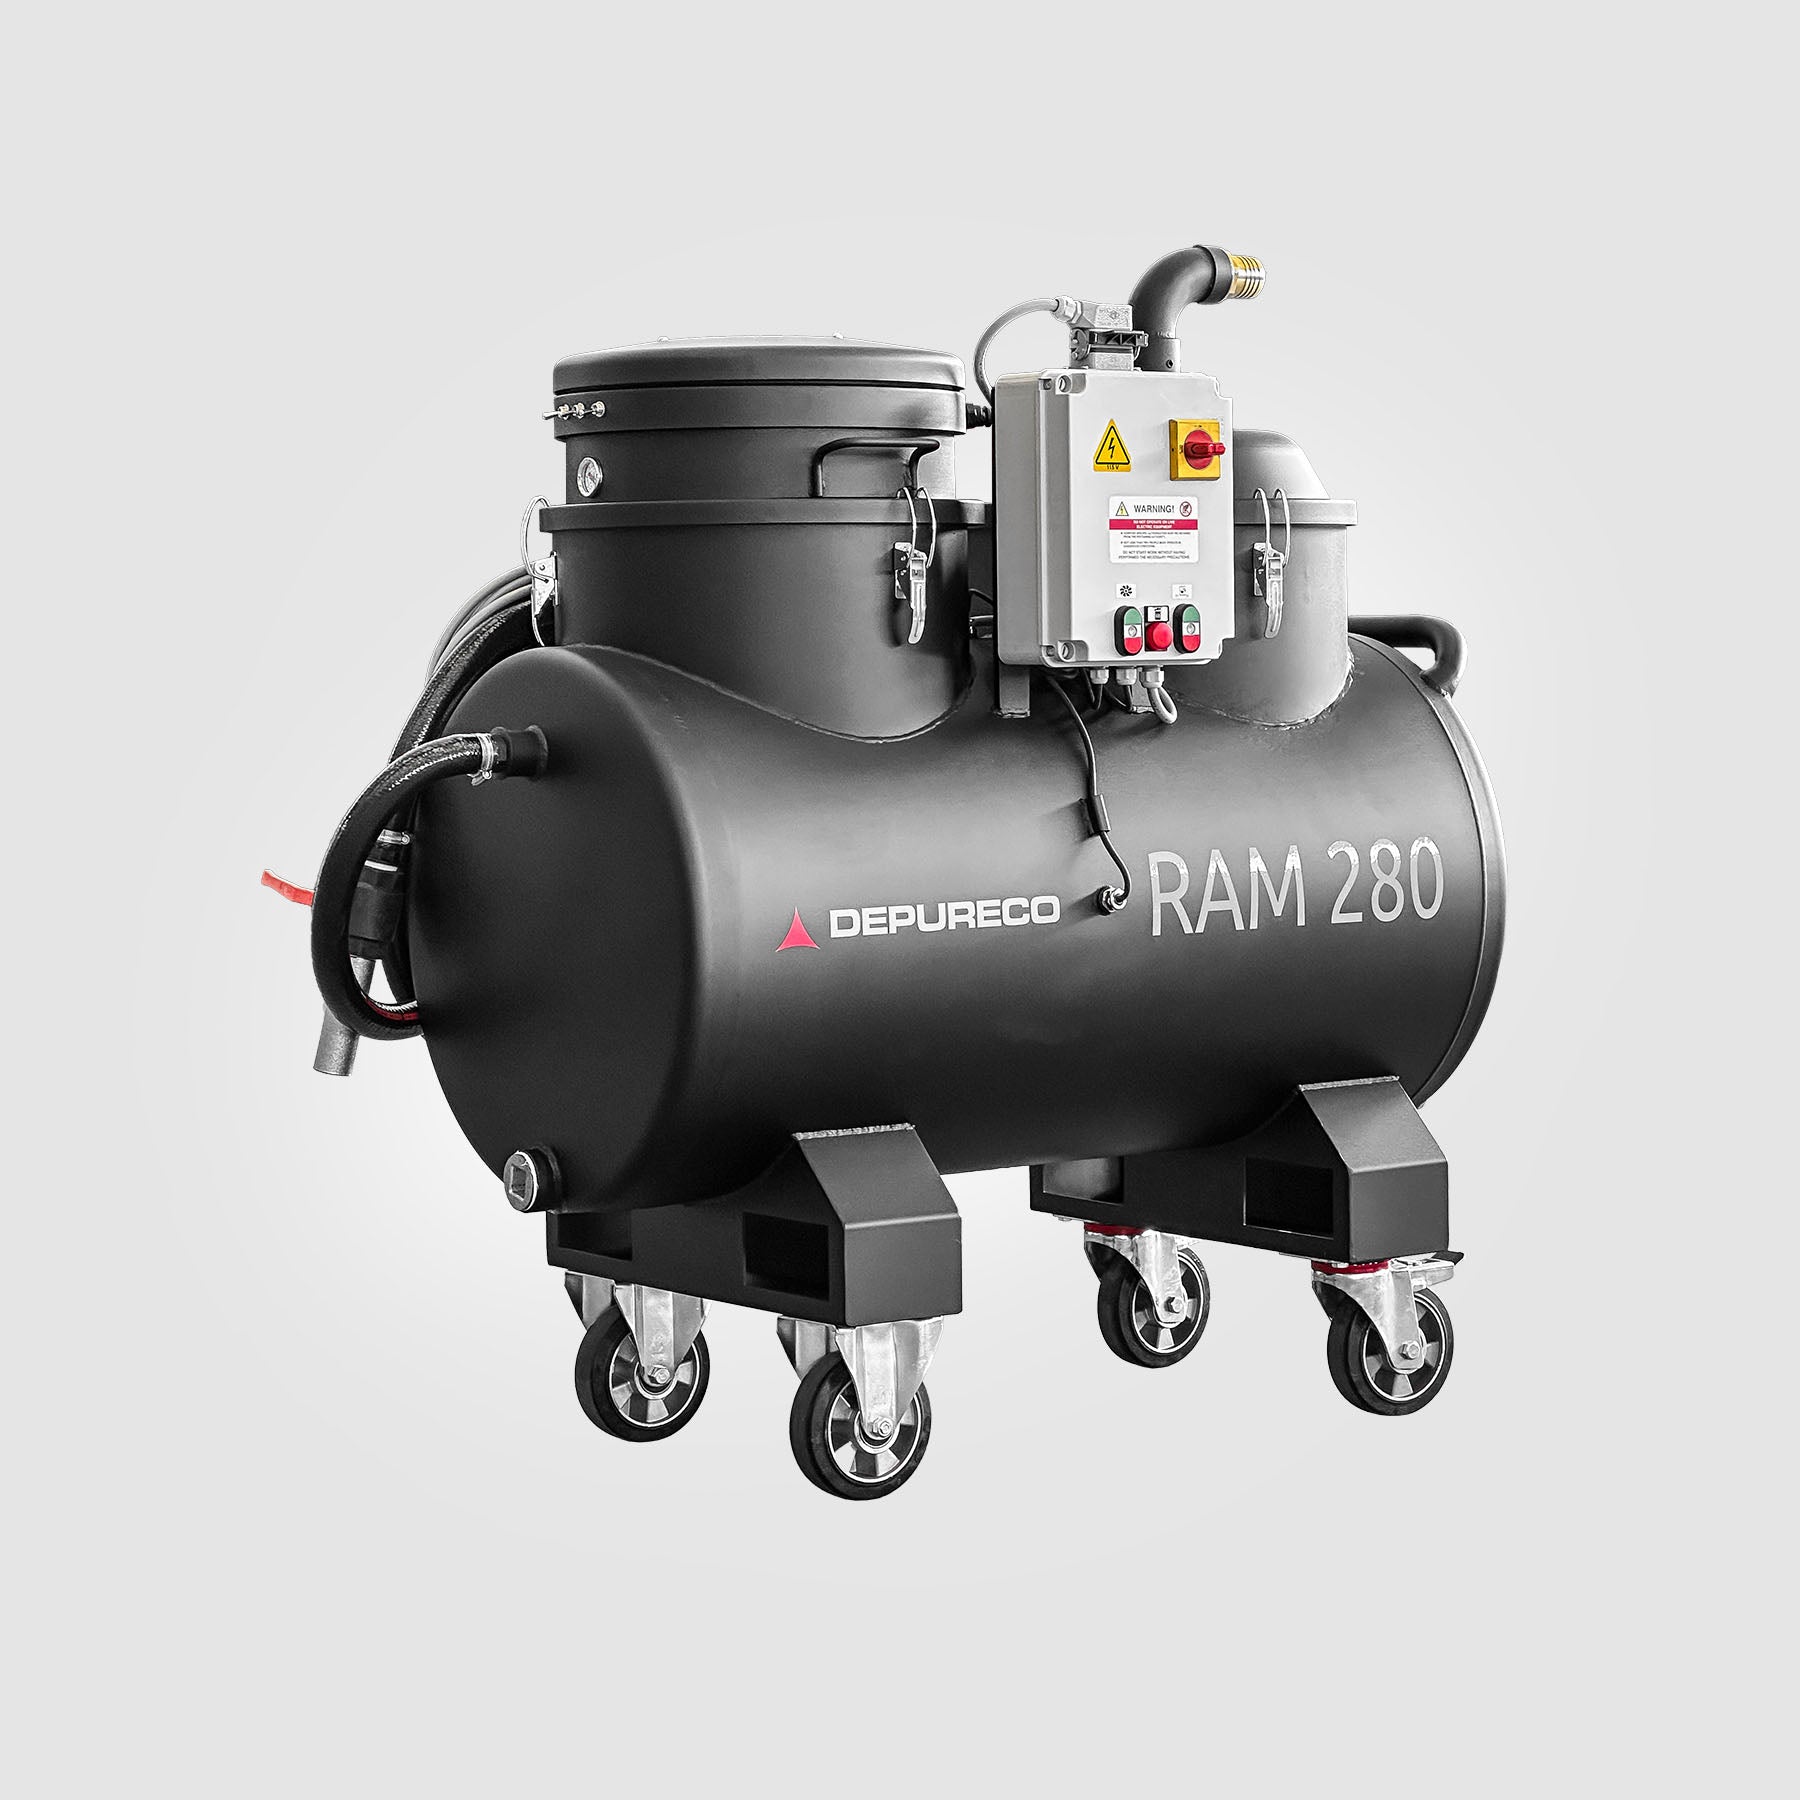 Chip & Coolant Evacuation Made Simple with the RAM 280 MP Industrial Vacuum